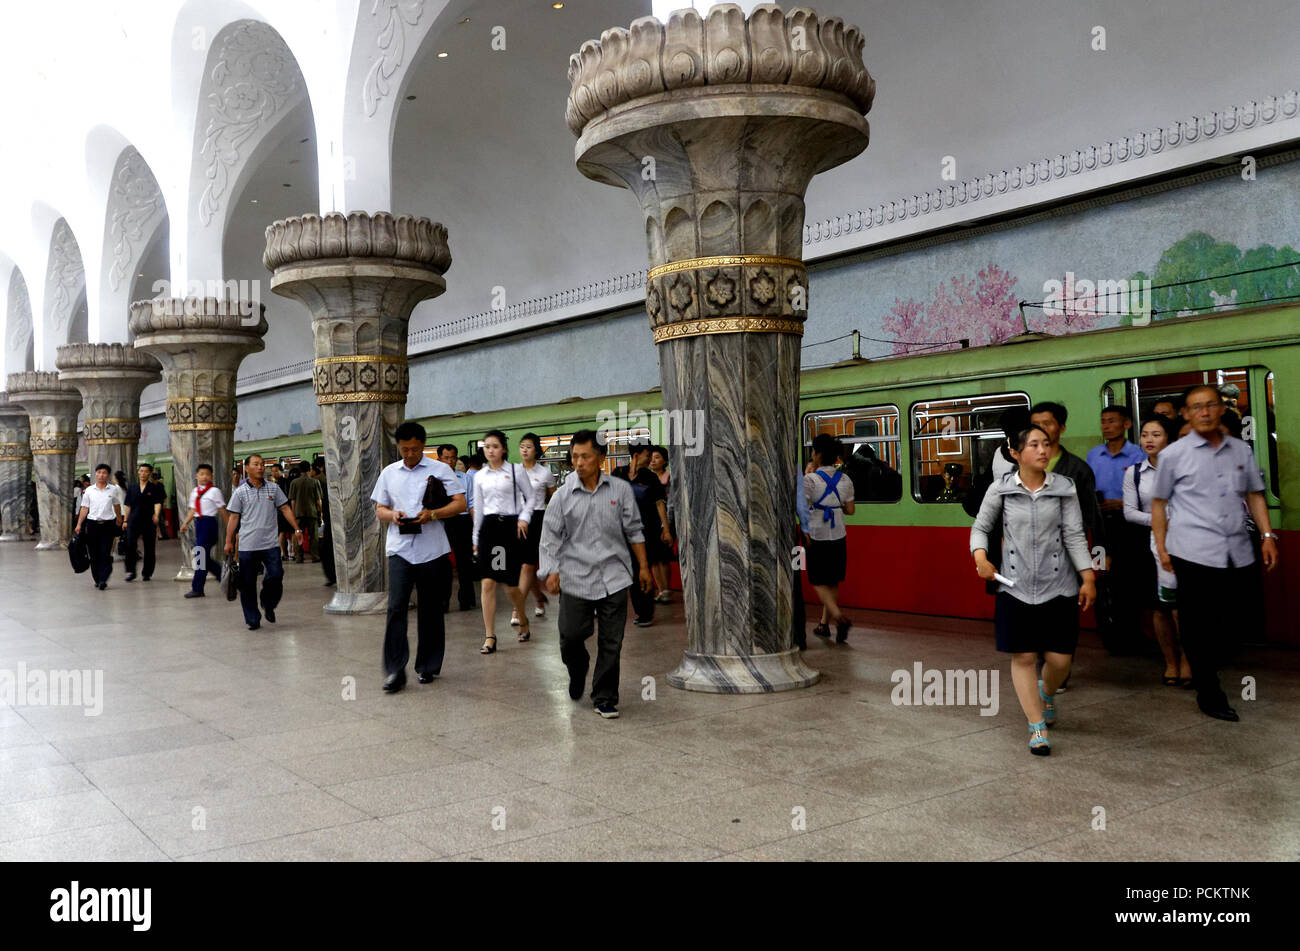 Commuters getting off an underground train At the Glory station on the Pyongyang Metro, North Korea Stock Photo